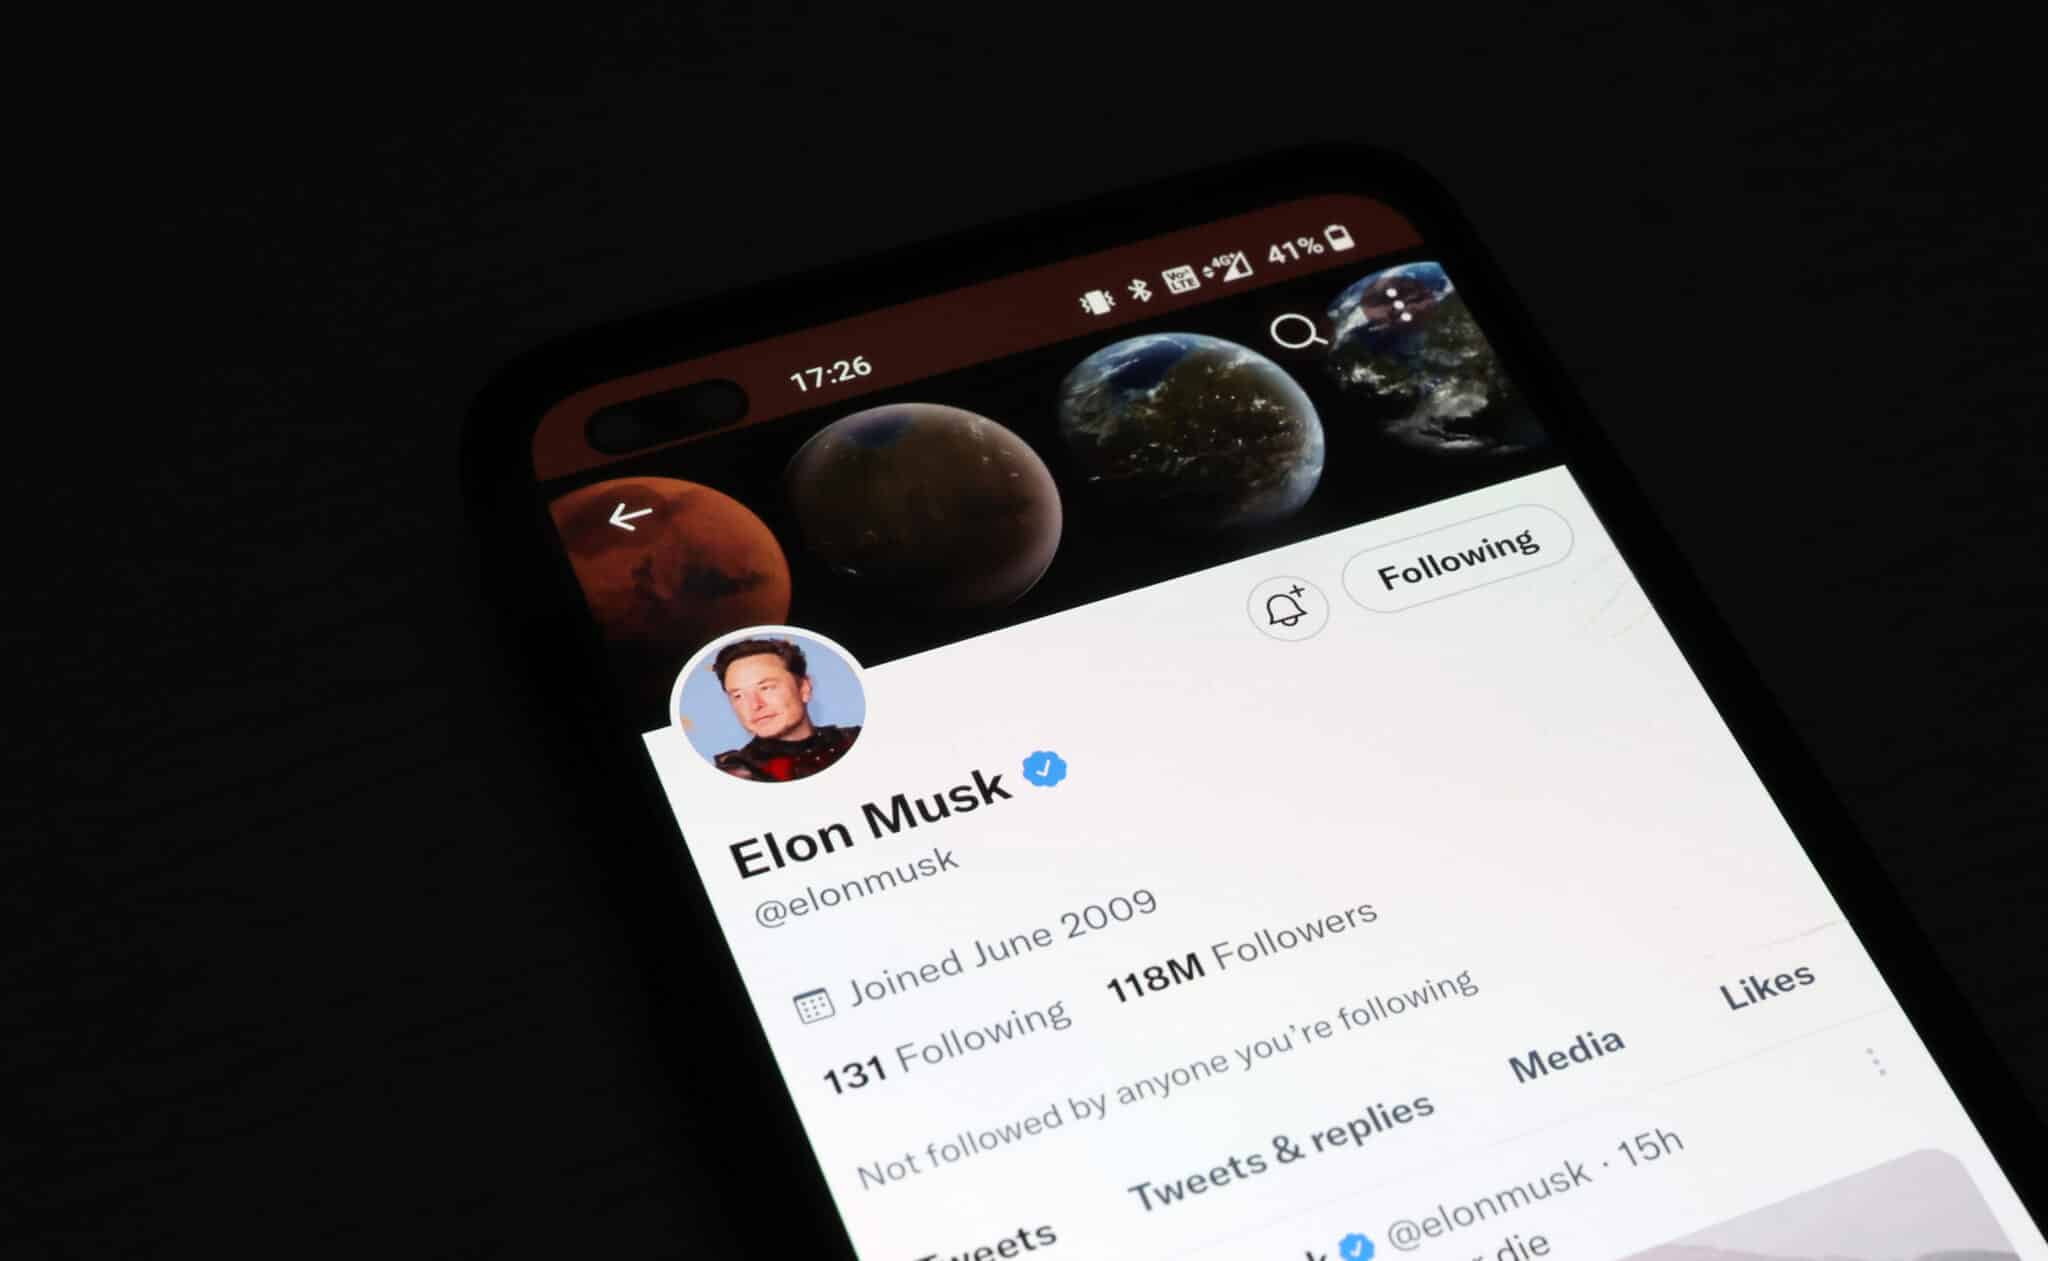 NEWCASTLE-UNDER-LYME, ENGLAND - NOVEMBER 21: The Twitter account of Elon Musk is displayed on a smartphone  on November 21, 2022 in Newcastle Under Lyme, England. (Photo by Nathan Stirk/Getty Images)